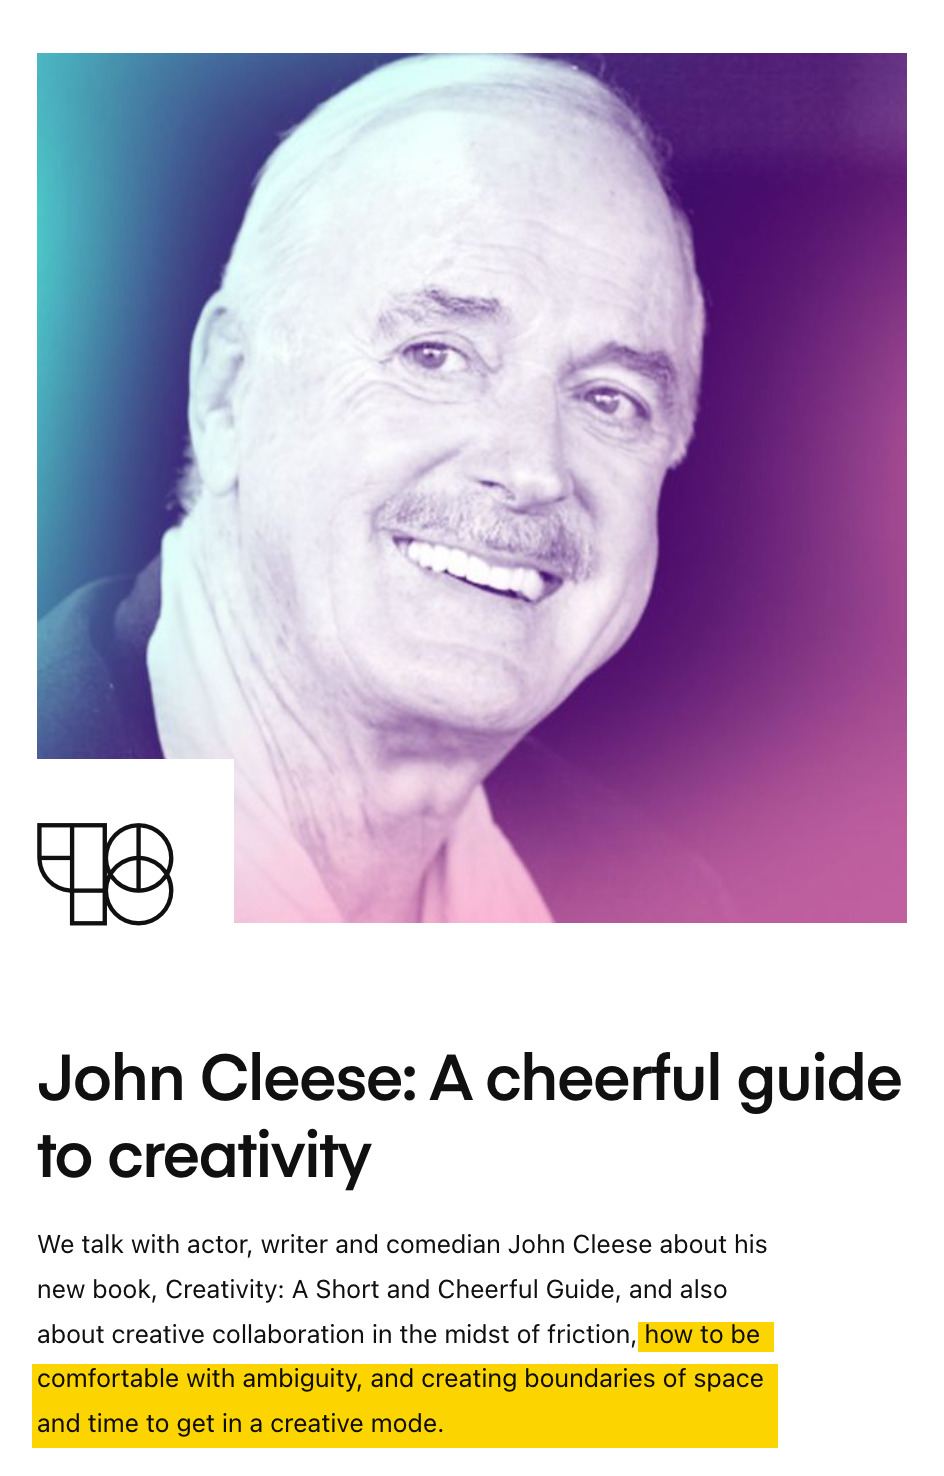 Podcast interview with John Cleese